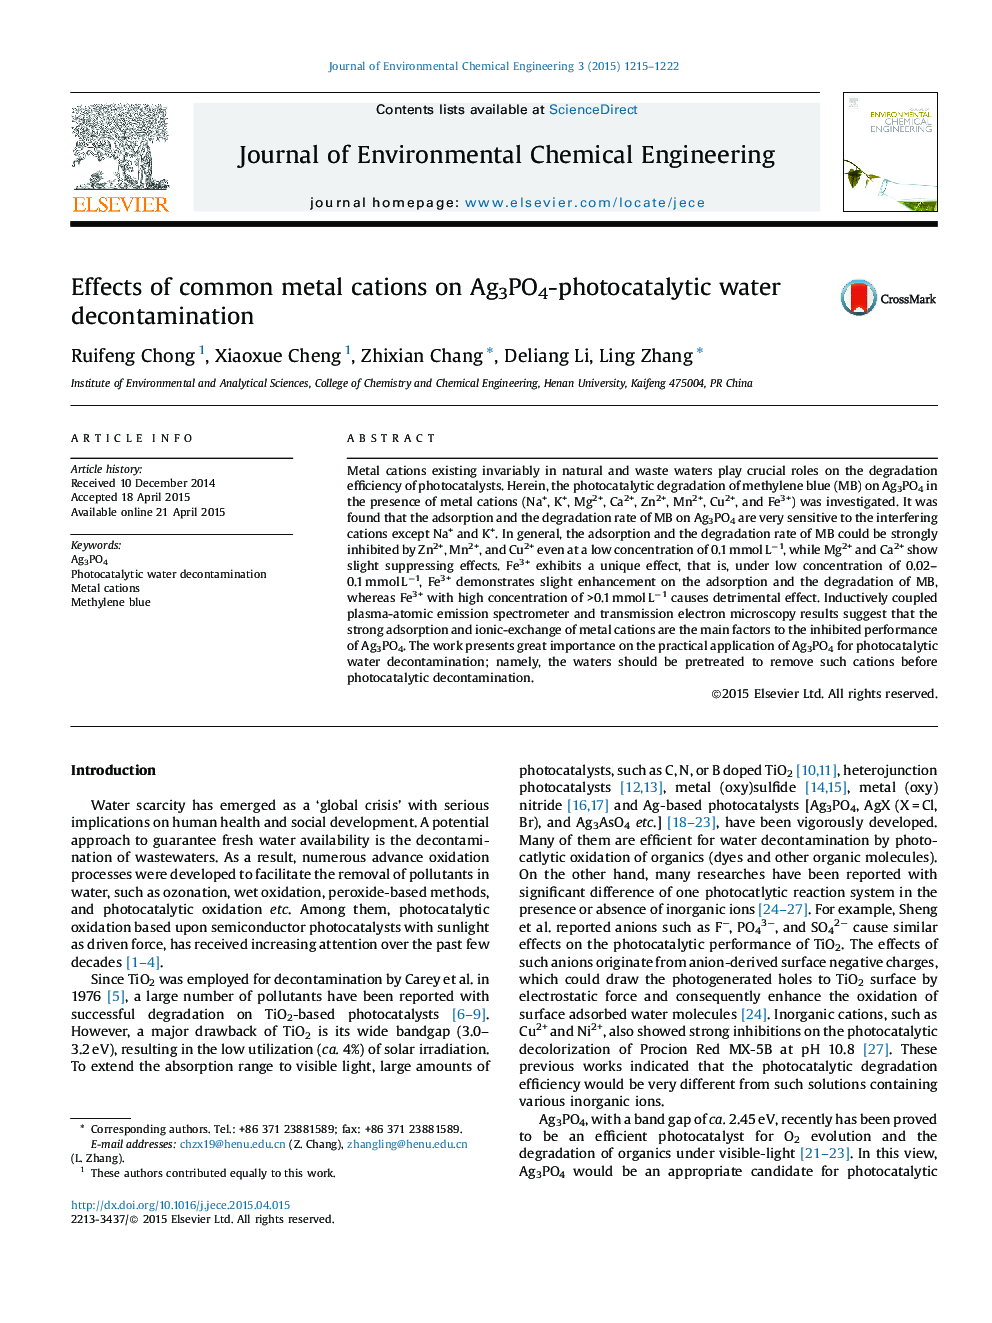 Effects of common metal cations on Ag3PO4-photocatalytic water decontamination